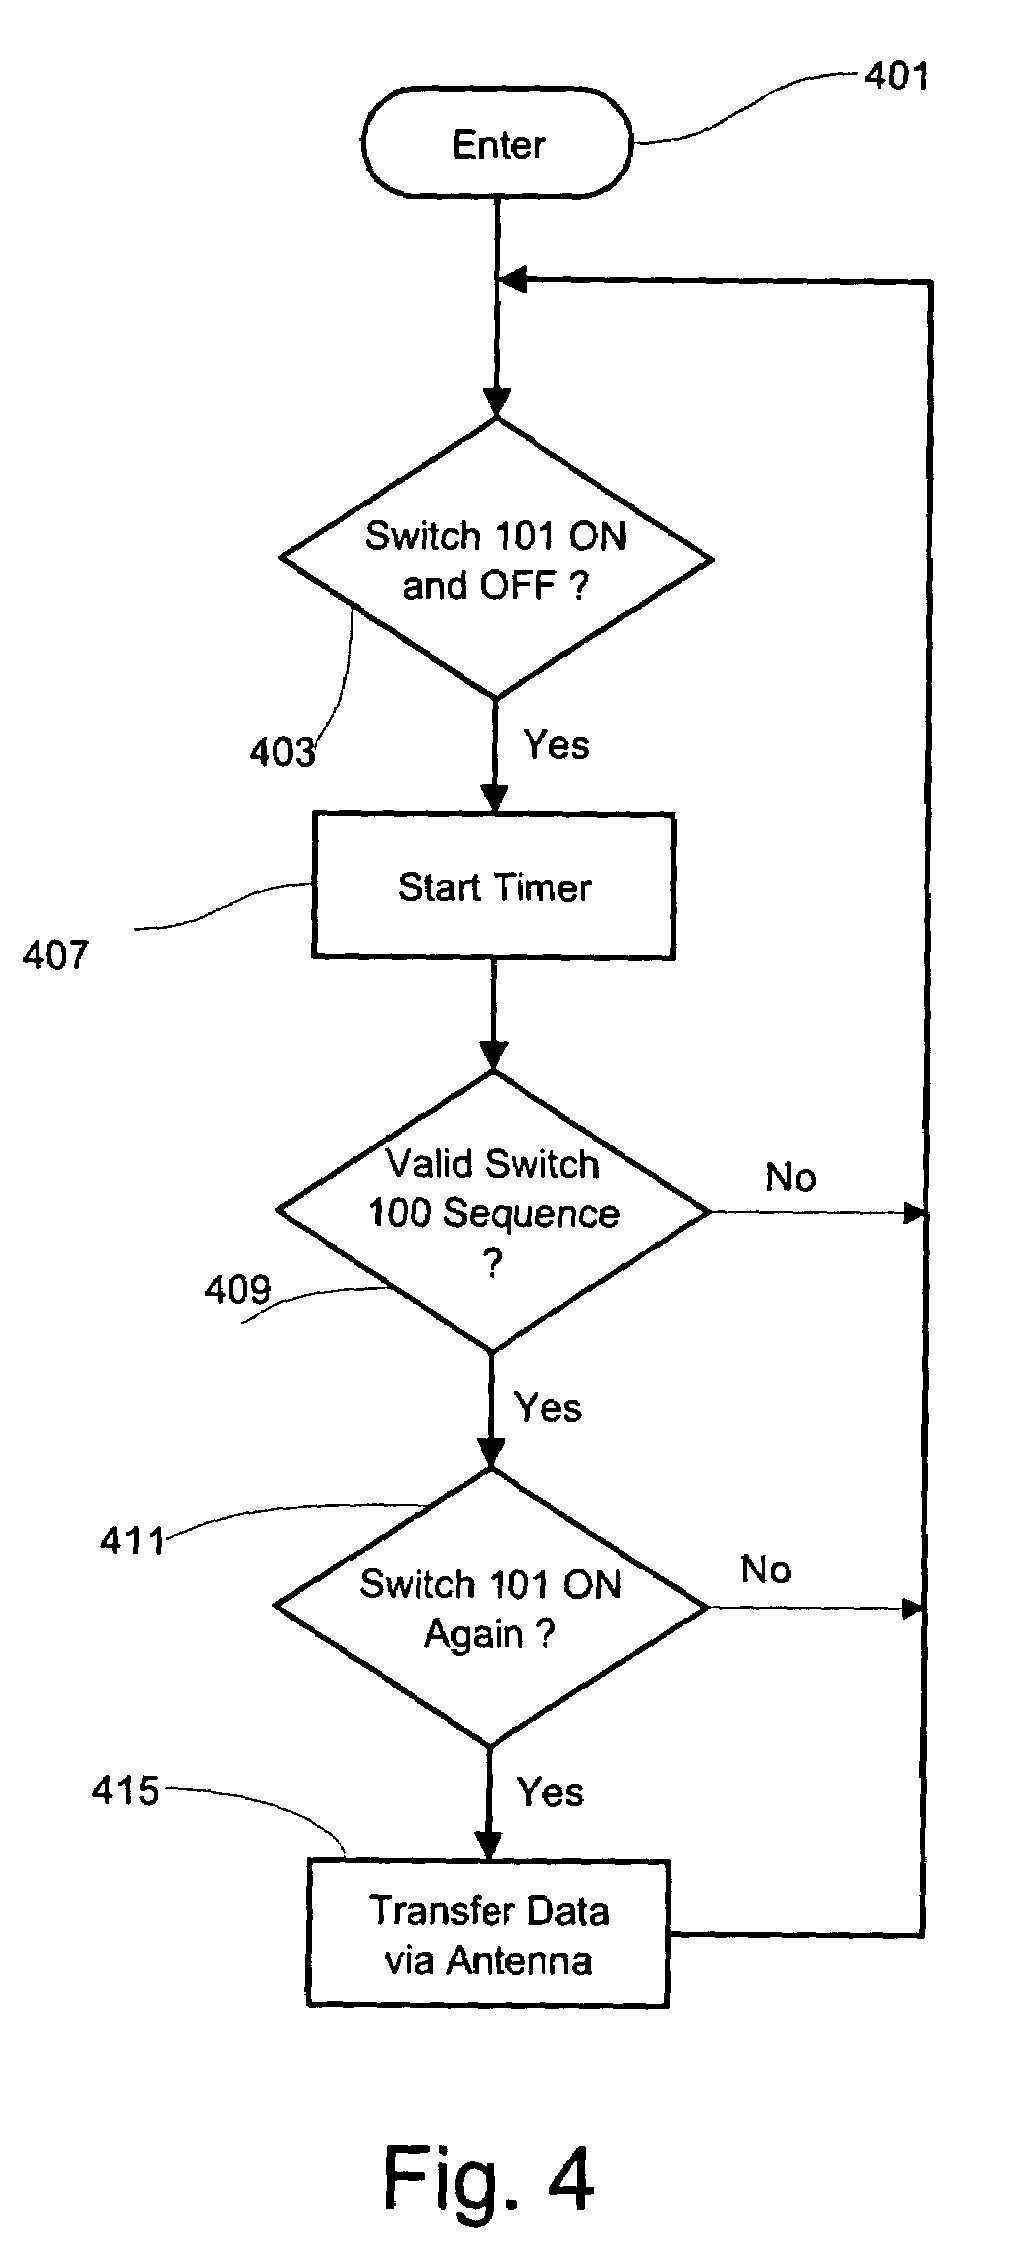 Methods and apparatus for wireless RFID cardholder signature and data entry